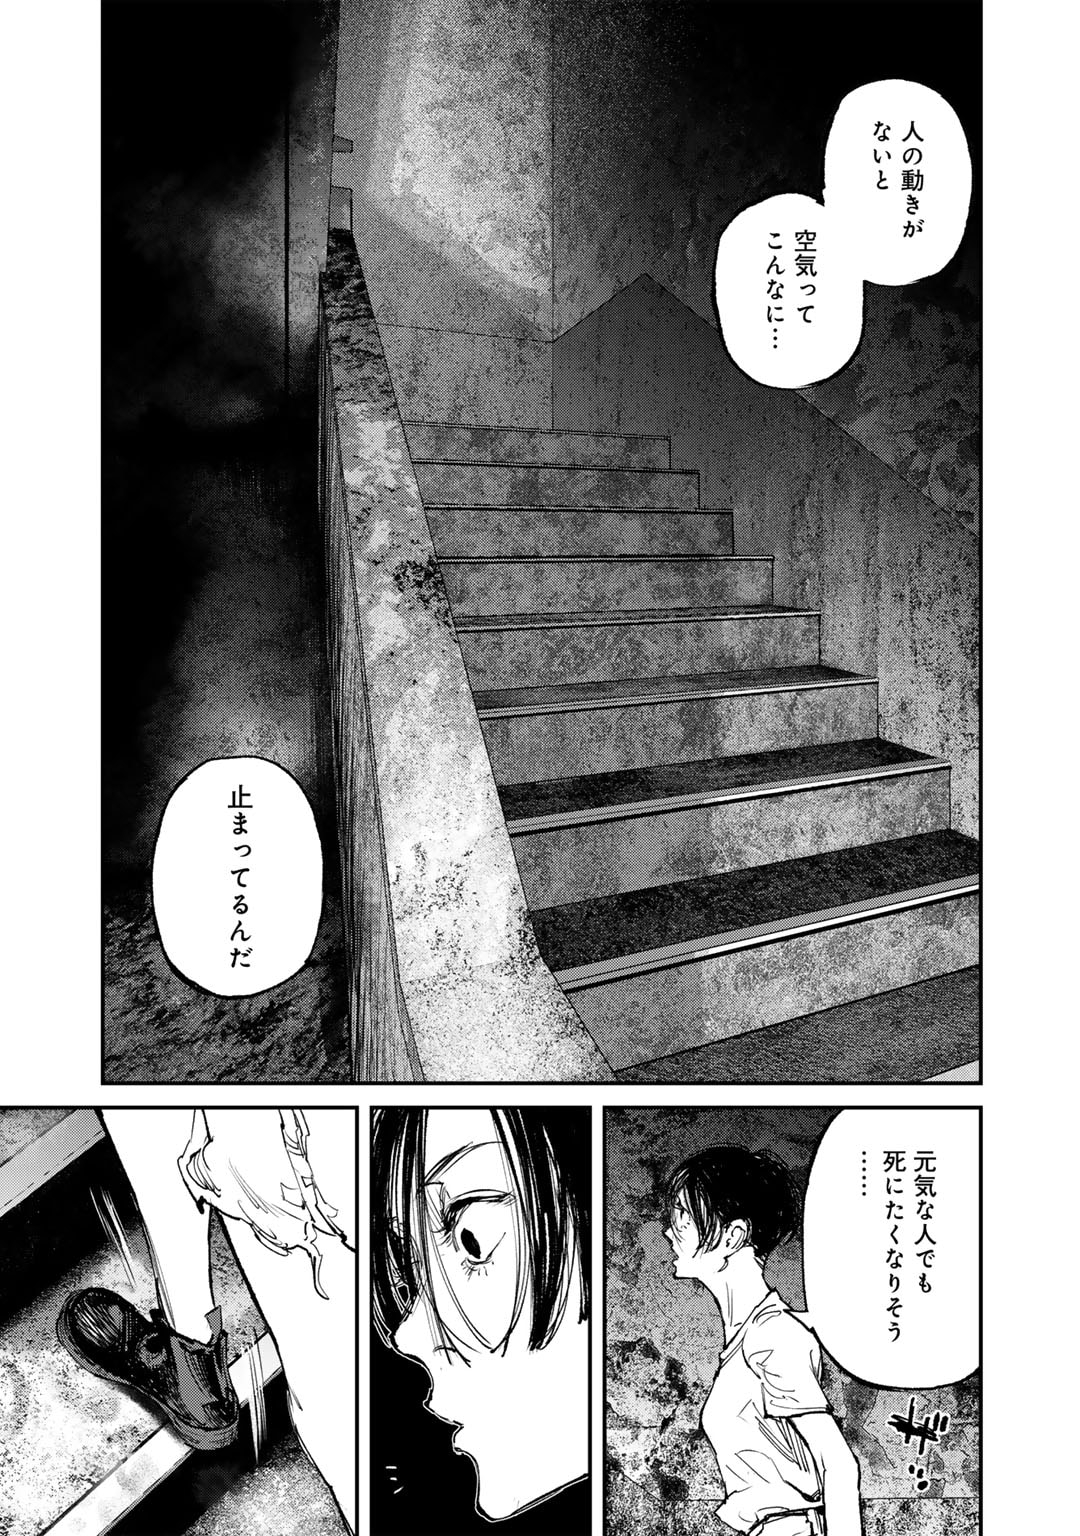 Kanata Is Into More Darker - Chapter 4 - Page 19